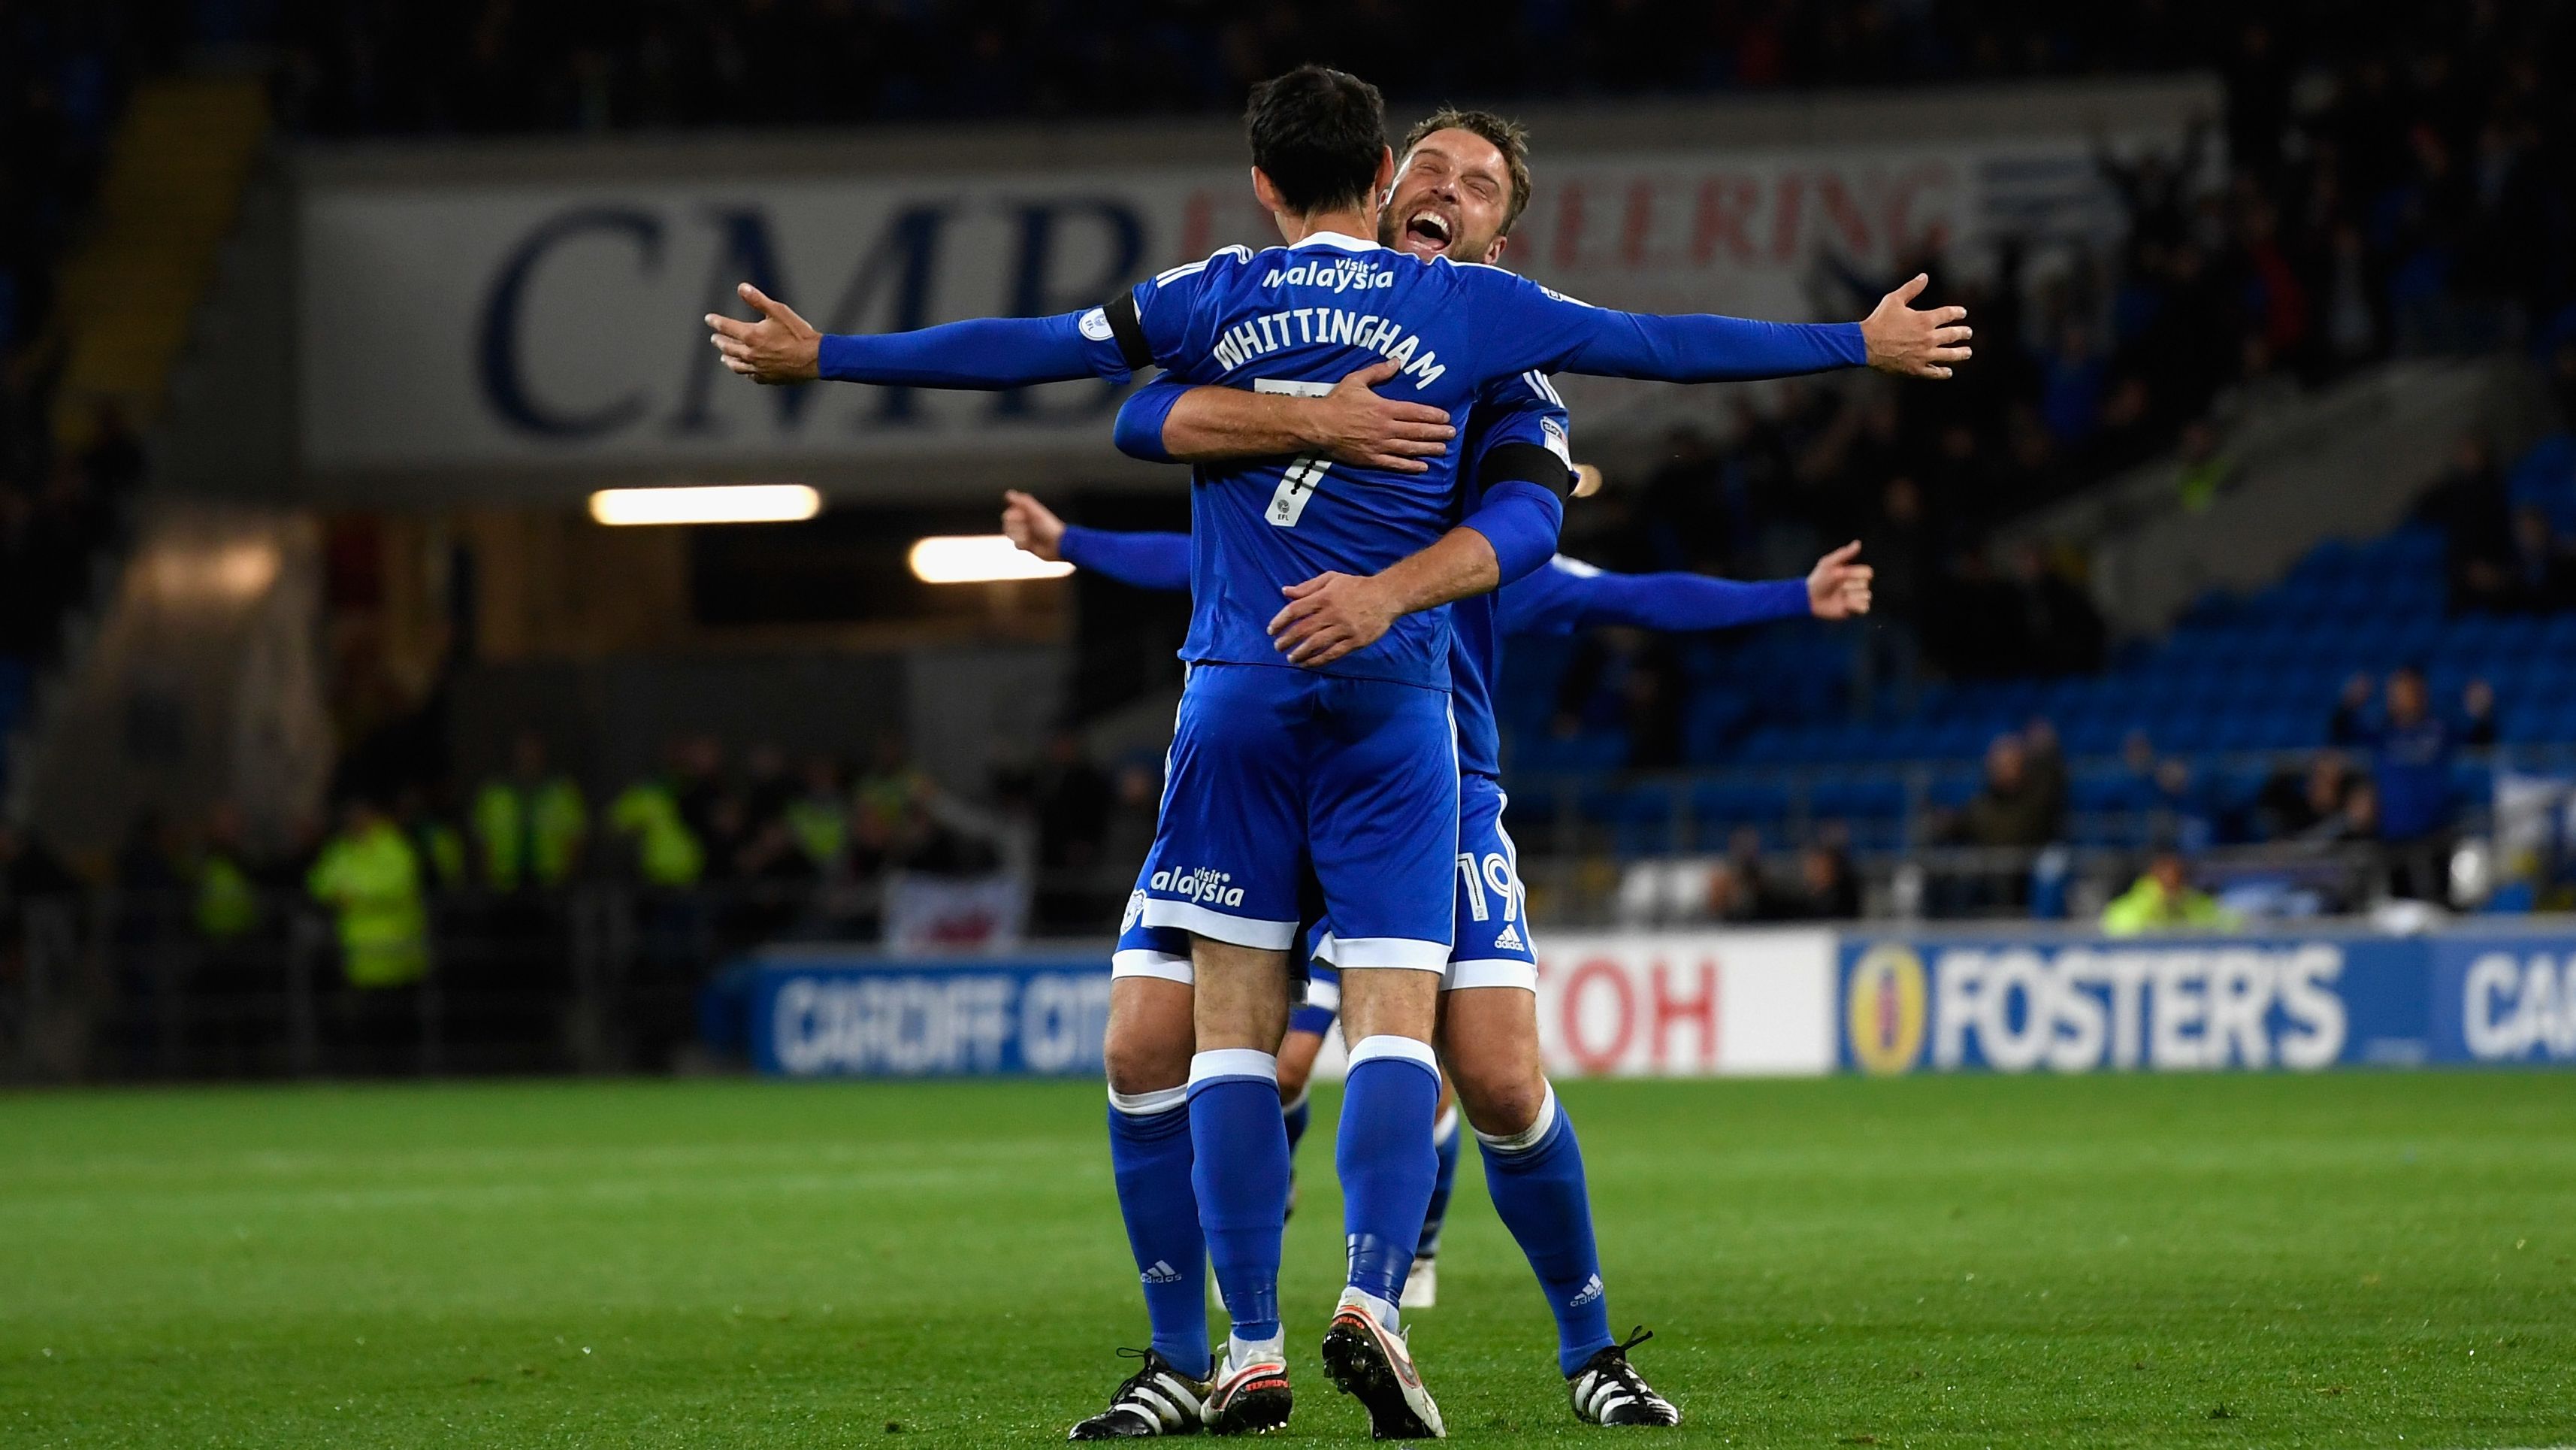 Whittingham is congratulated by Rickie Lambert after scoring a free kick against Sheffield Wednesday.